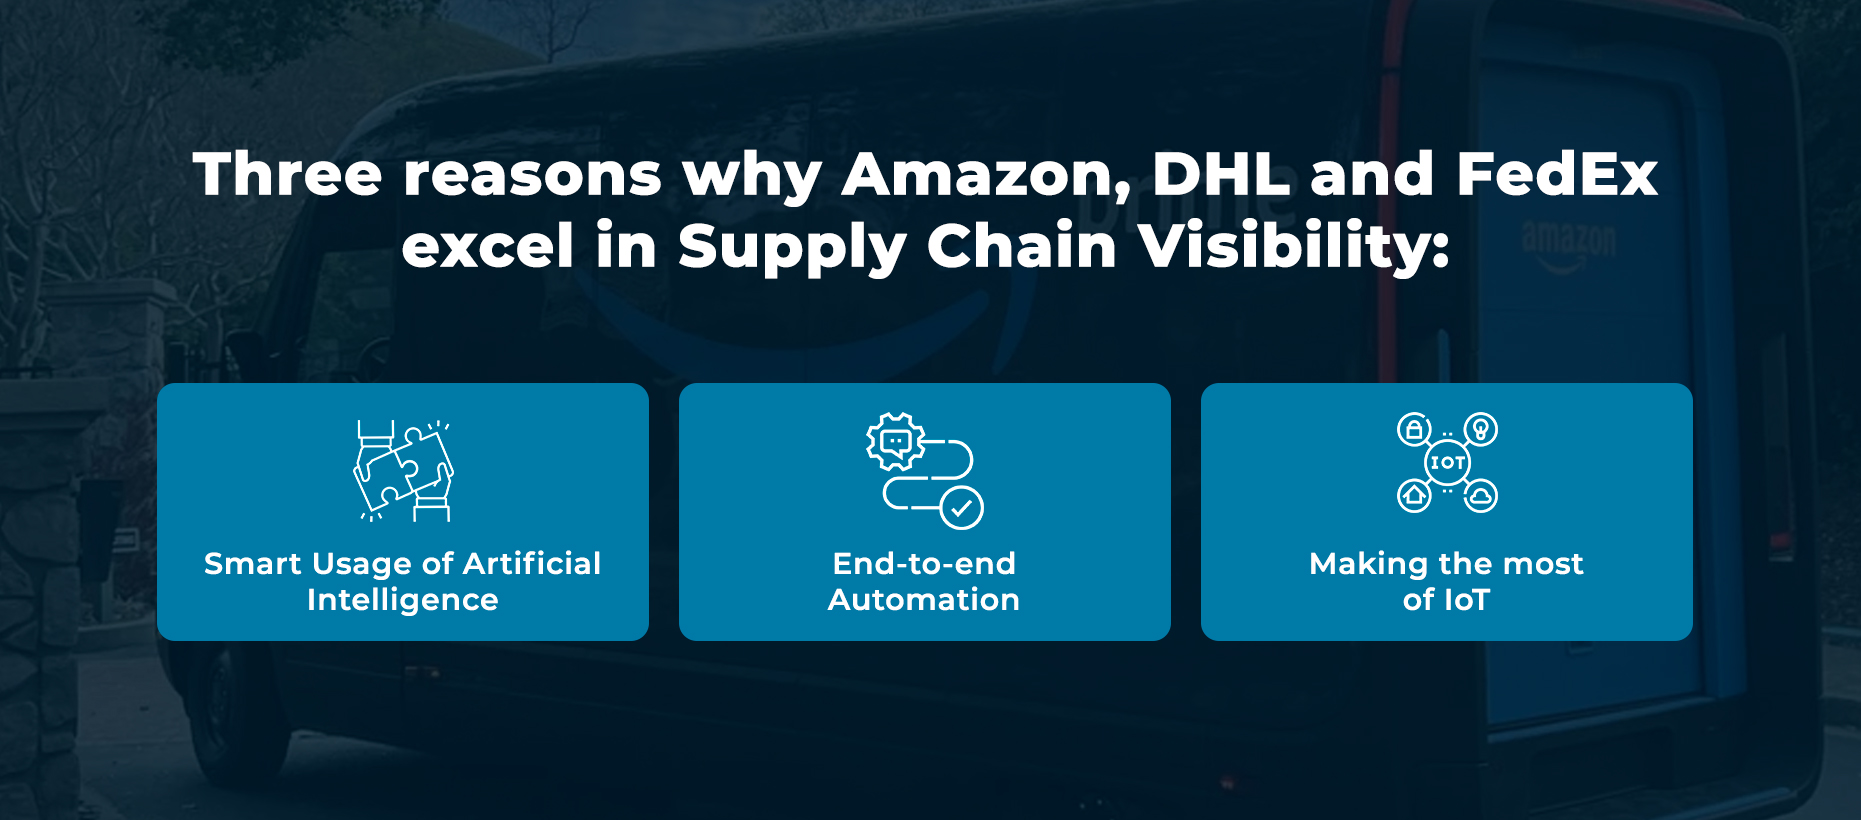 Supply chain visibility for brands